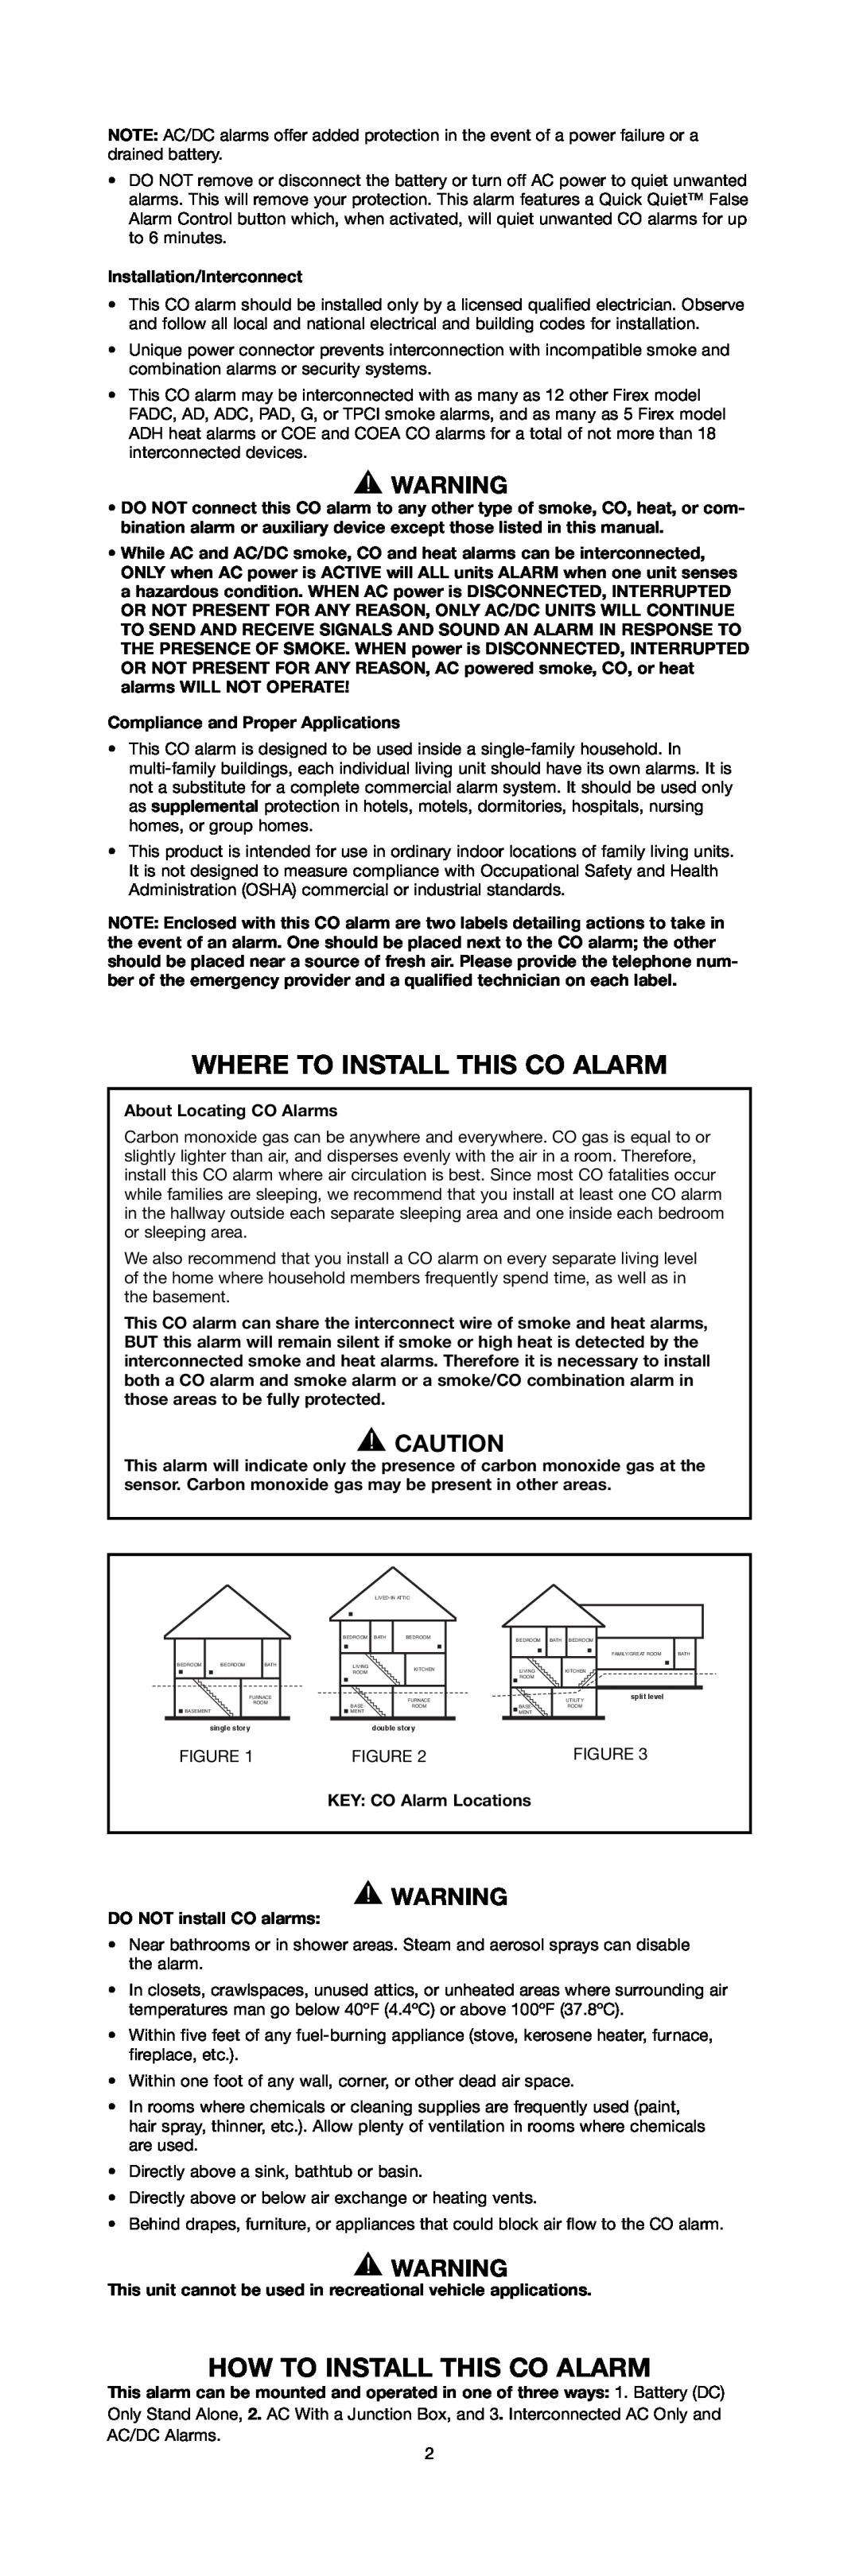 Firex SERIES 10000 specifications Where To Install This Co Alarm, How To Install This Co Alarm, KEY CO Alarm Locations 